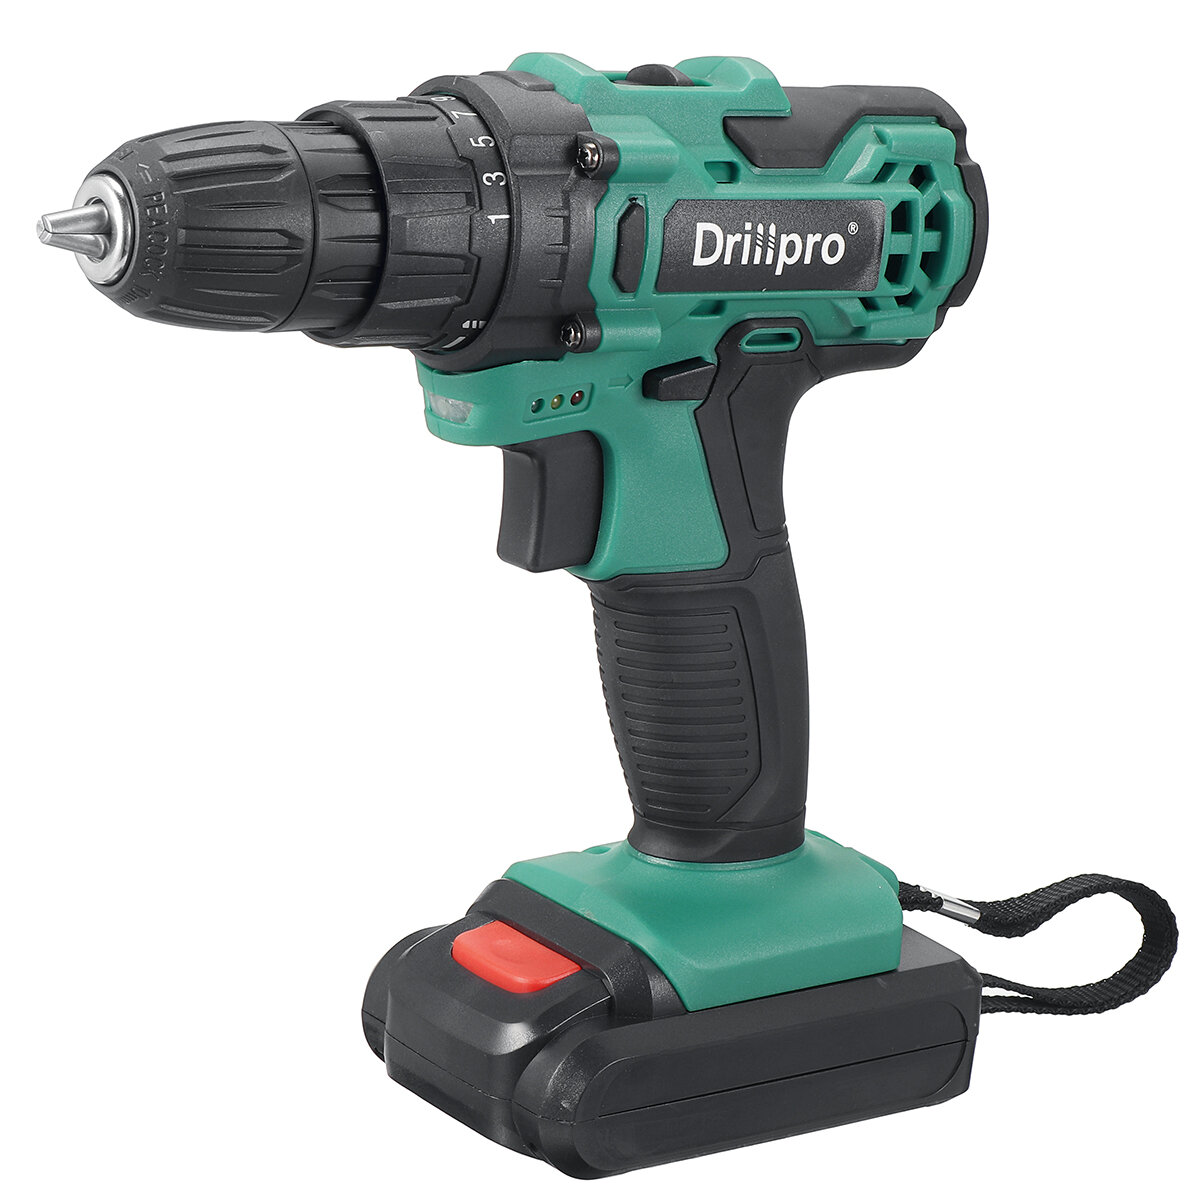 Drillpro 21V 1.5AH Cordless Drill Rechargeable 2 Speed Electric Drill Screwdriver W/ 1 or 2pcs Batte